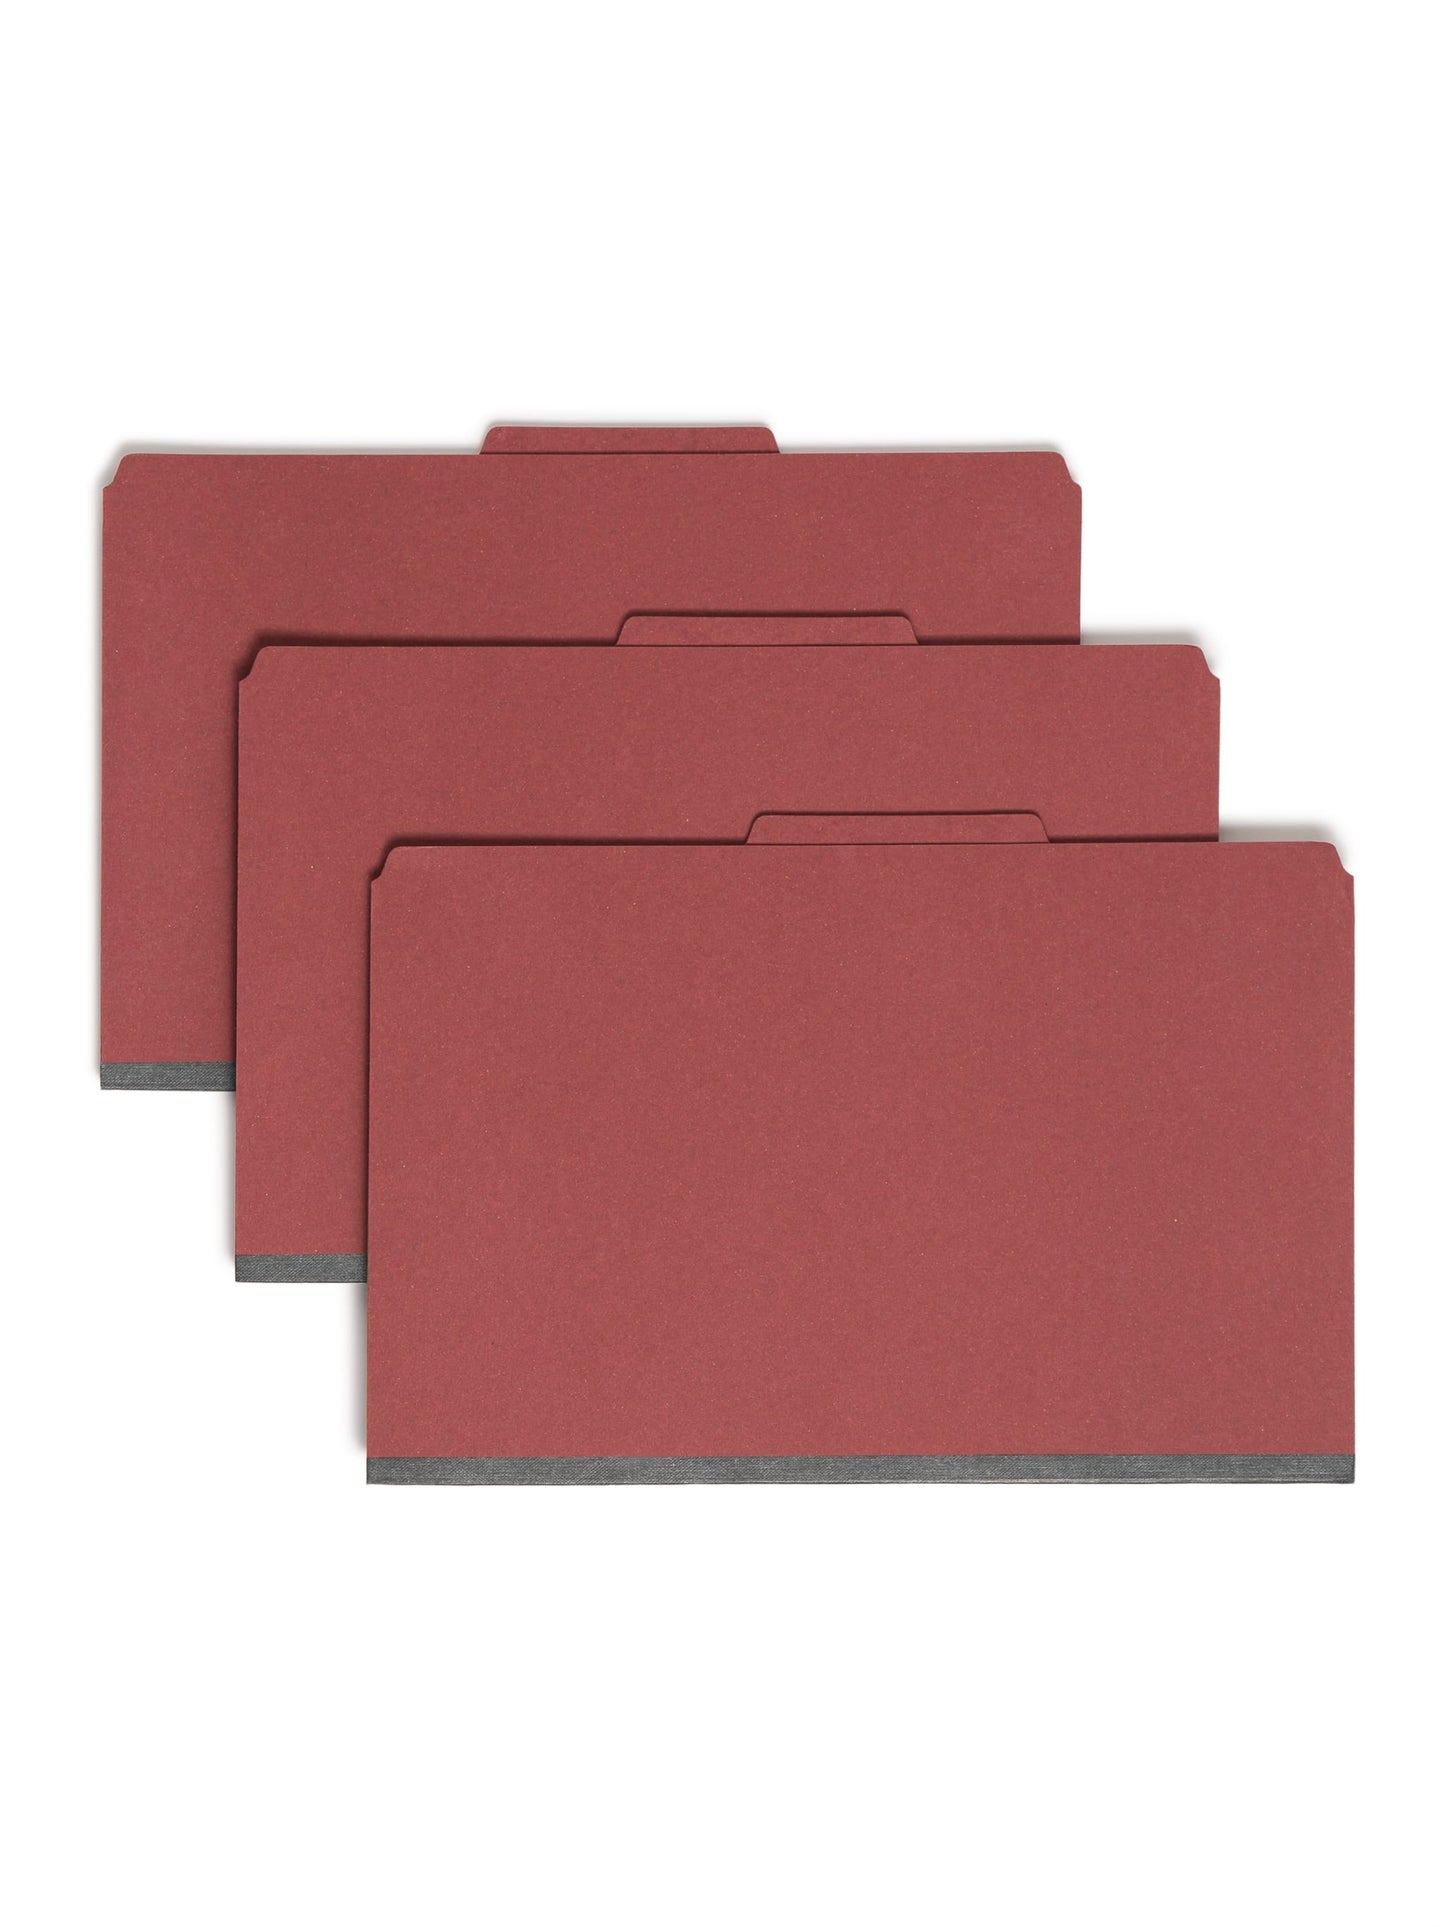 SafeSHIELD® Pressboard Classification File Folders with Pocket Dividers, Red Color, Legal Size, 